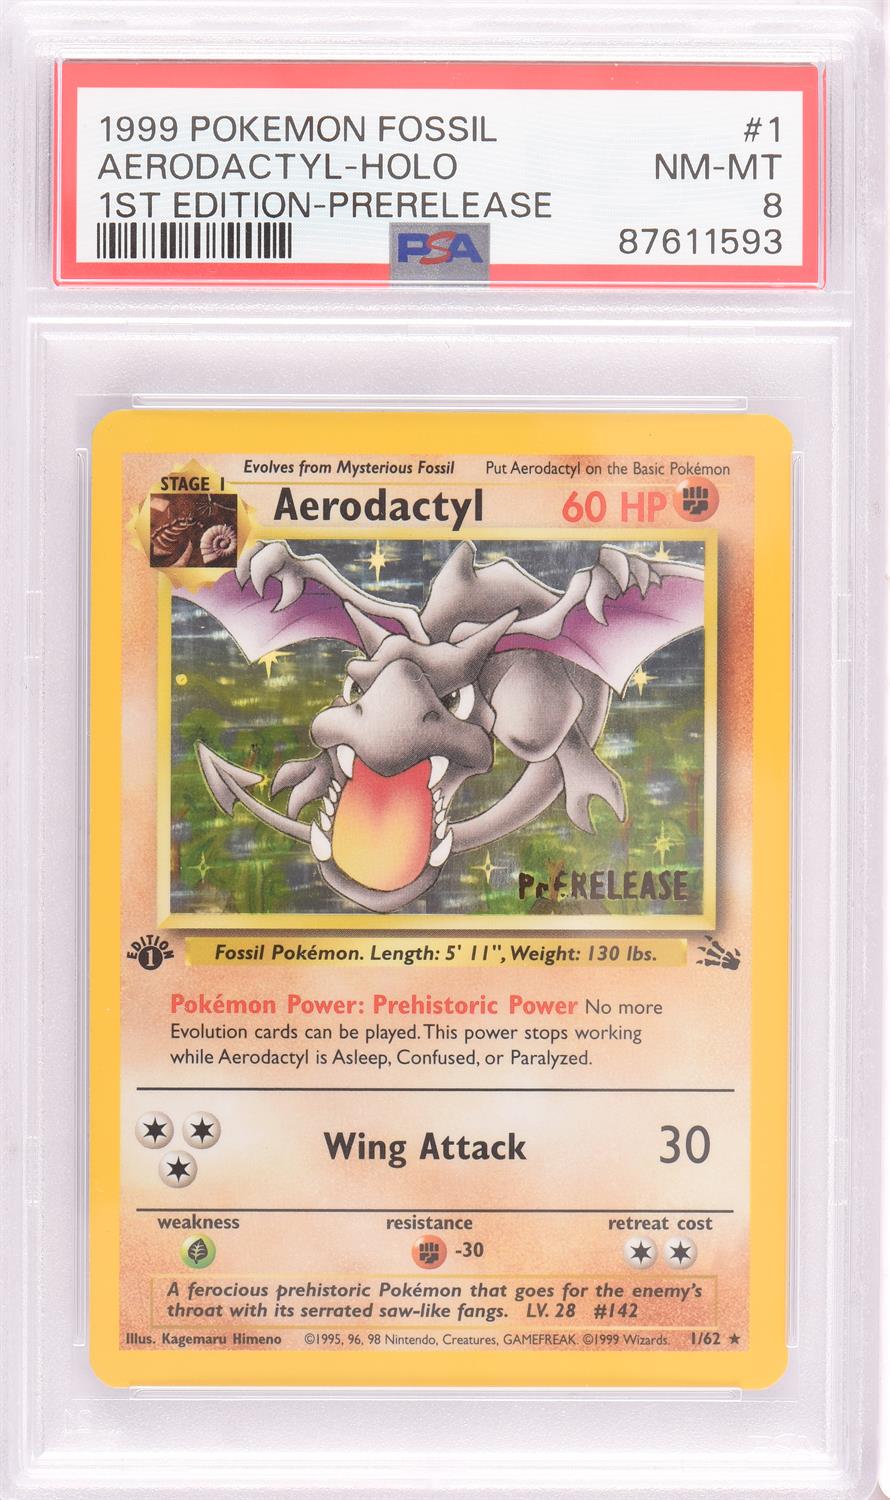 Pokemon TCG. Aerodactyl 1/62 Prerelease 1st Edition Fossil PSA 8. The pre-release stamp on the card